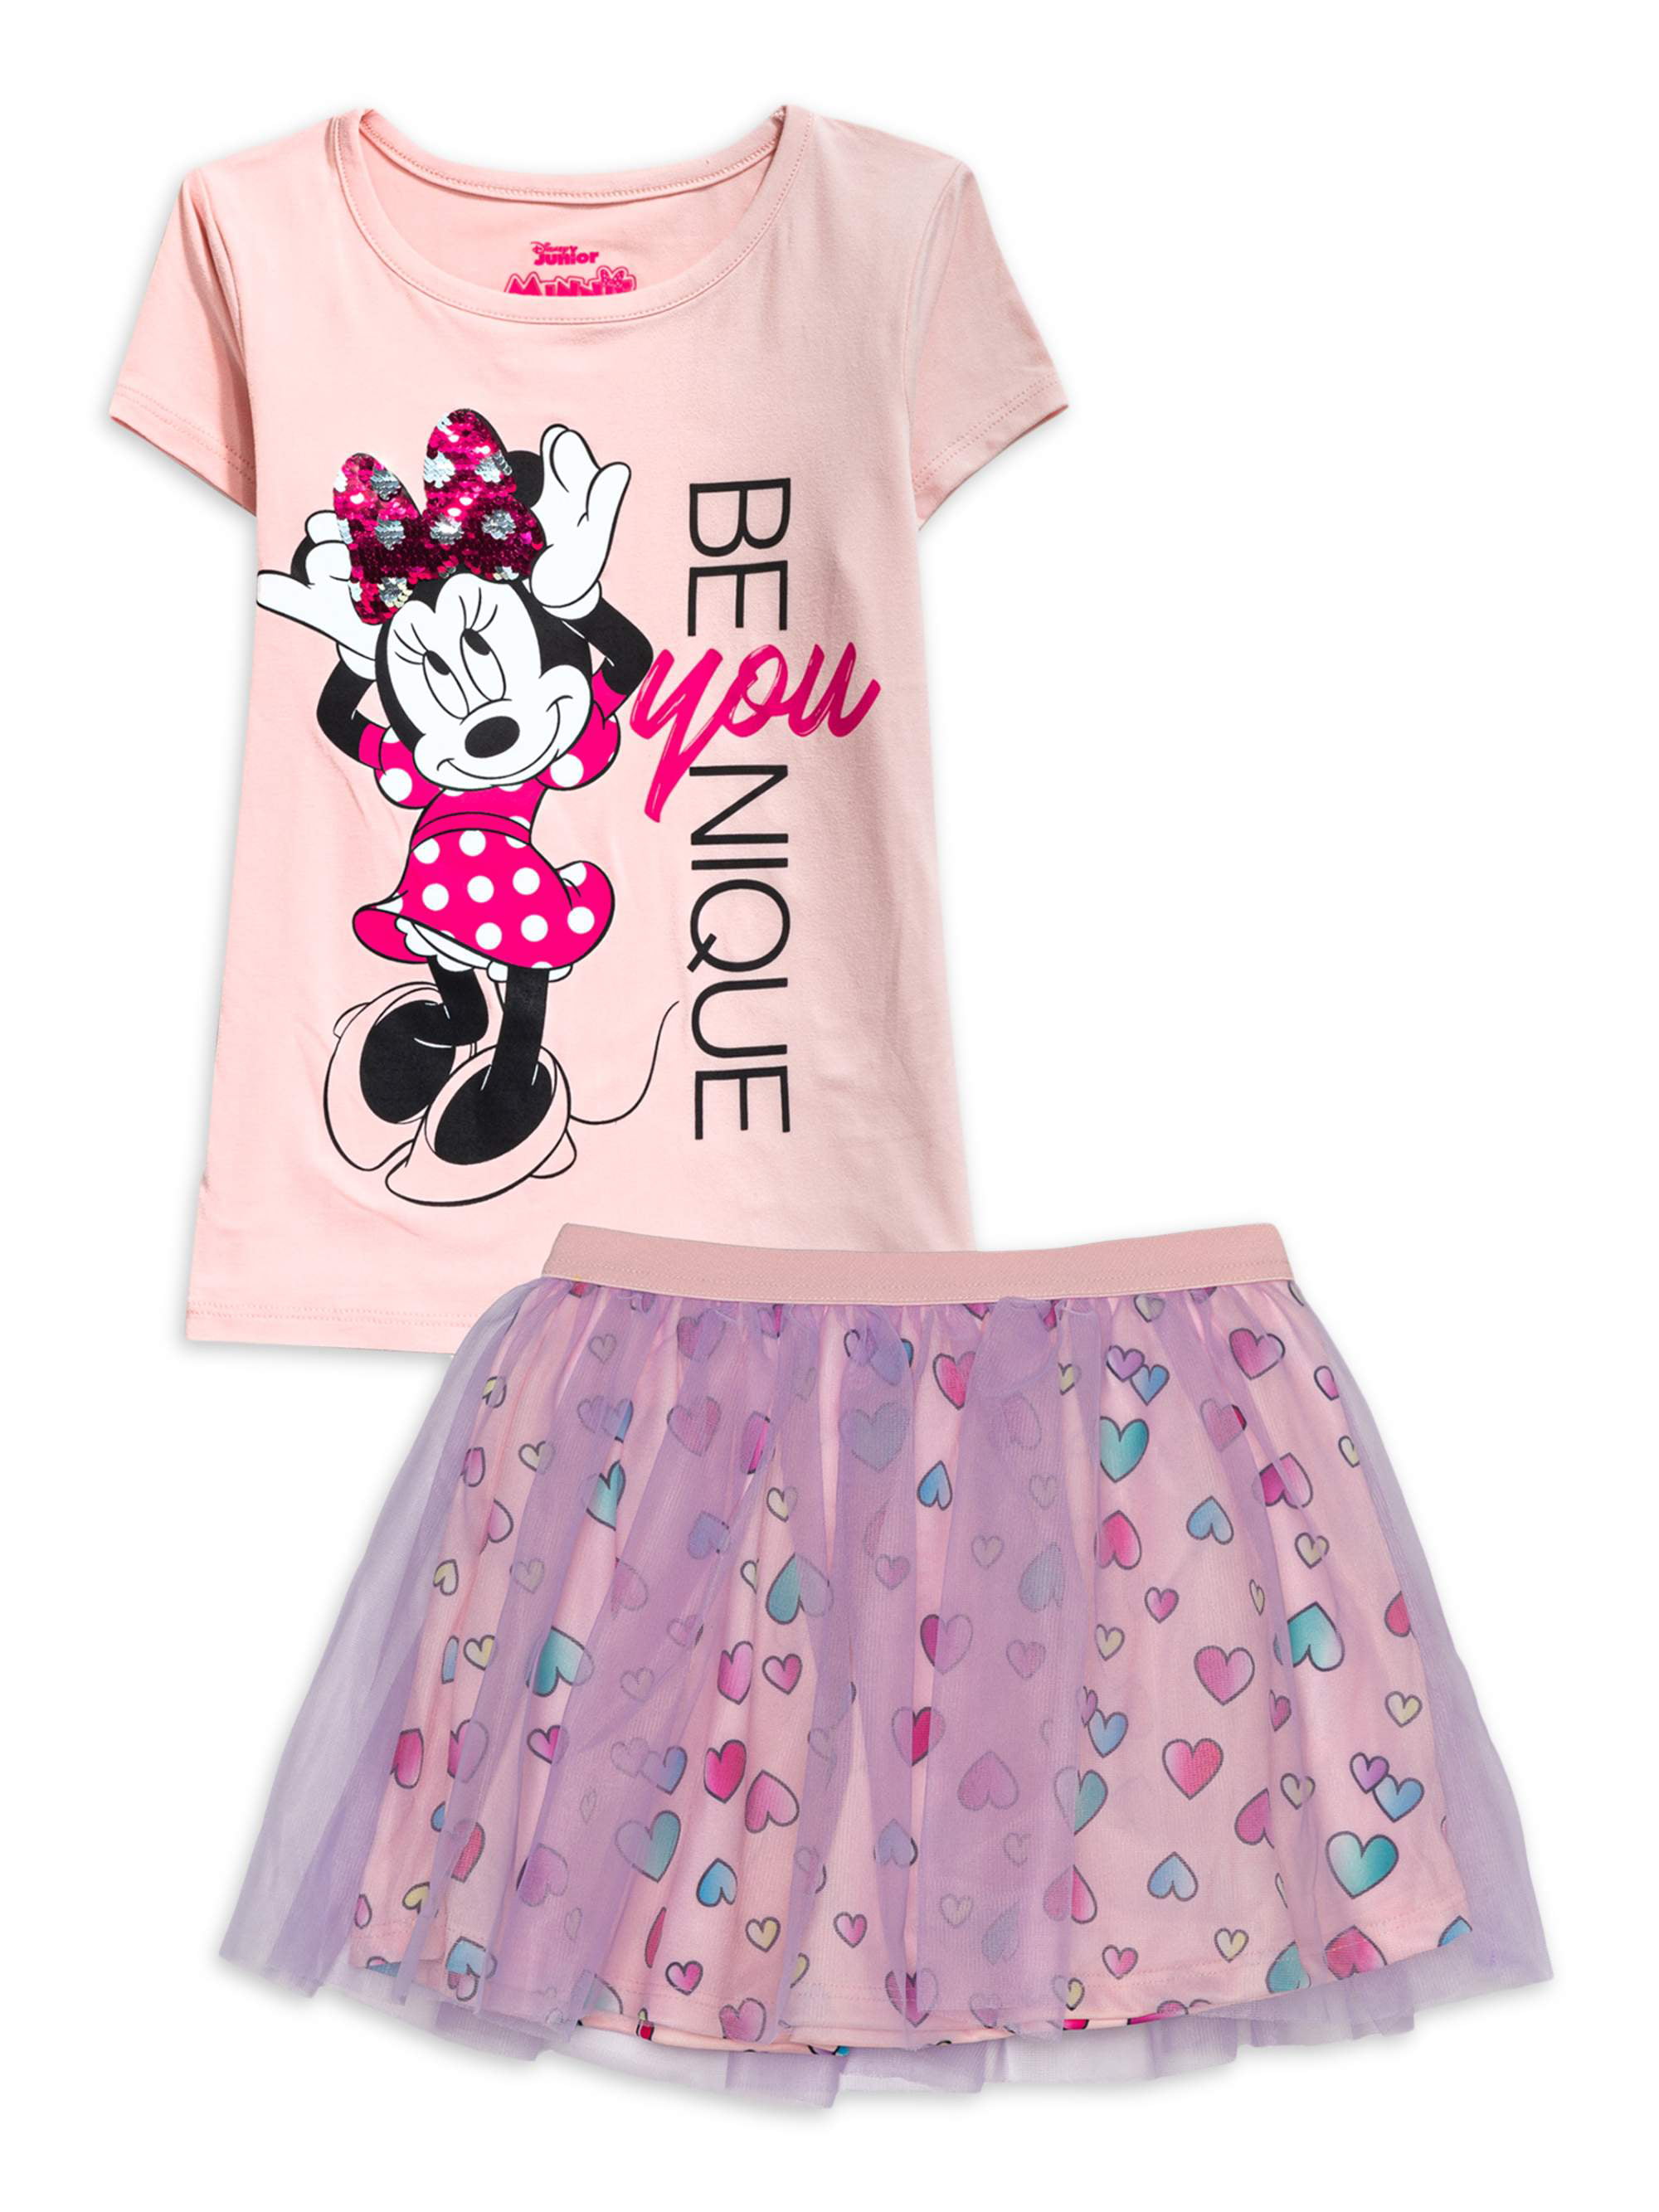 Minnie Mouse Girls Tie Front Tee Top and Glitter Printed Tutu Tulle Skirt 2-Piece Outfit Set Sizes 4-16